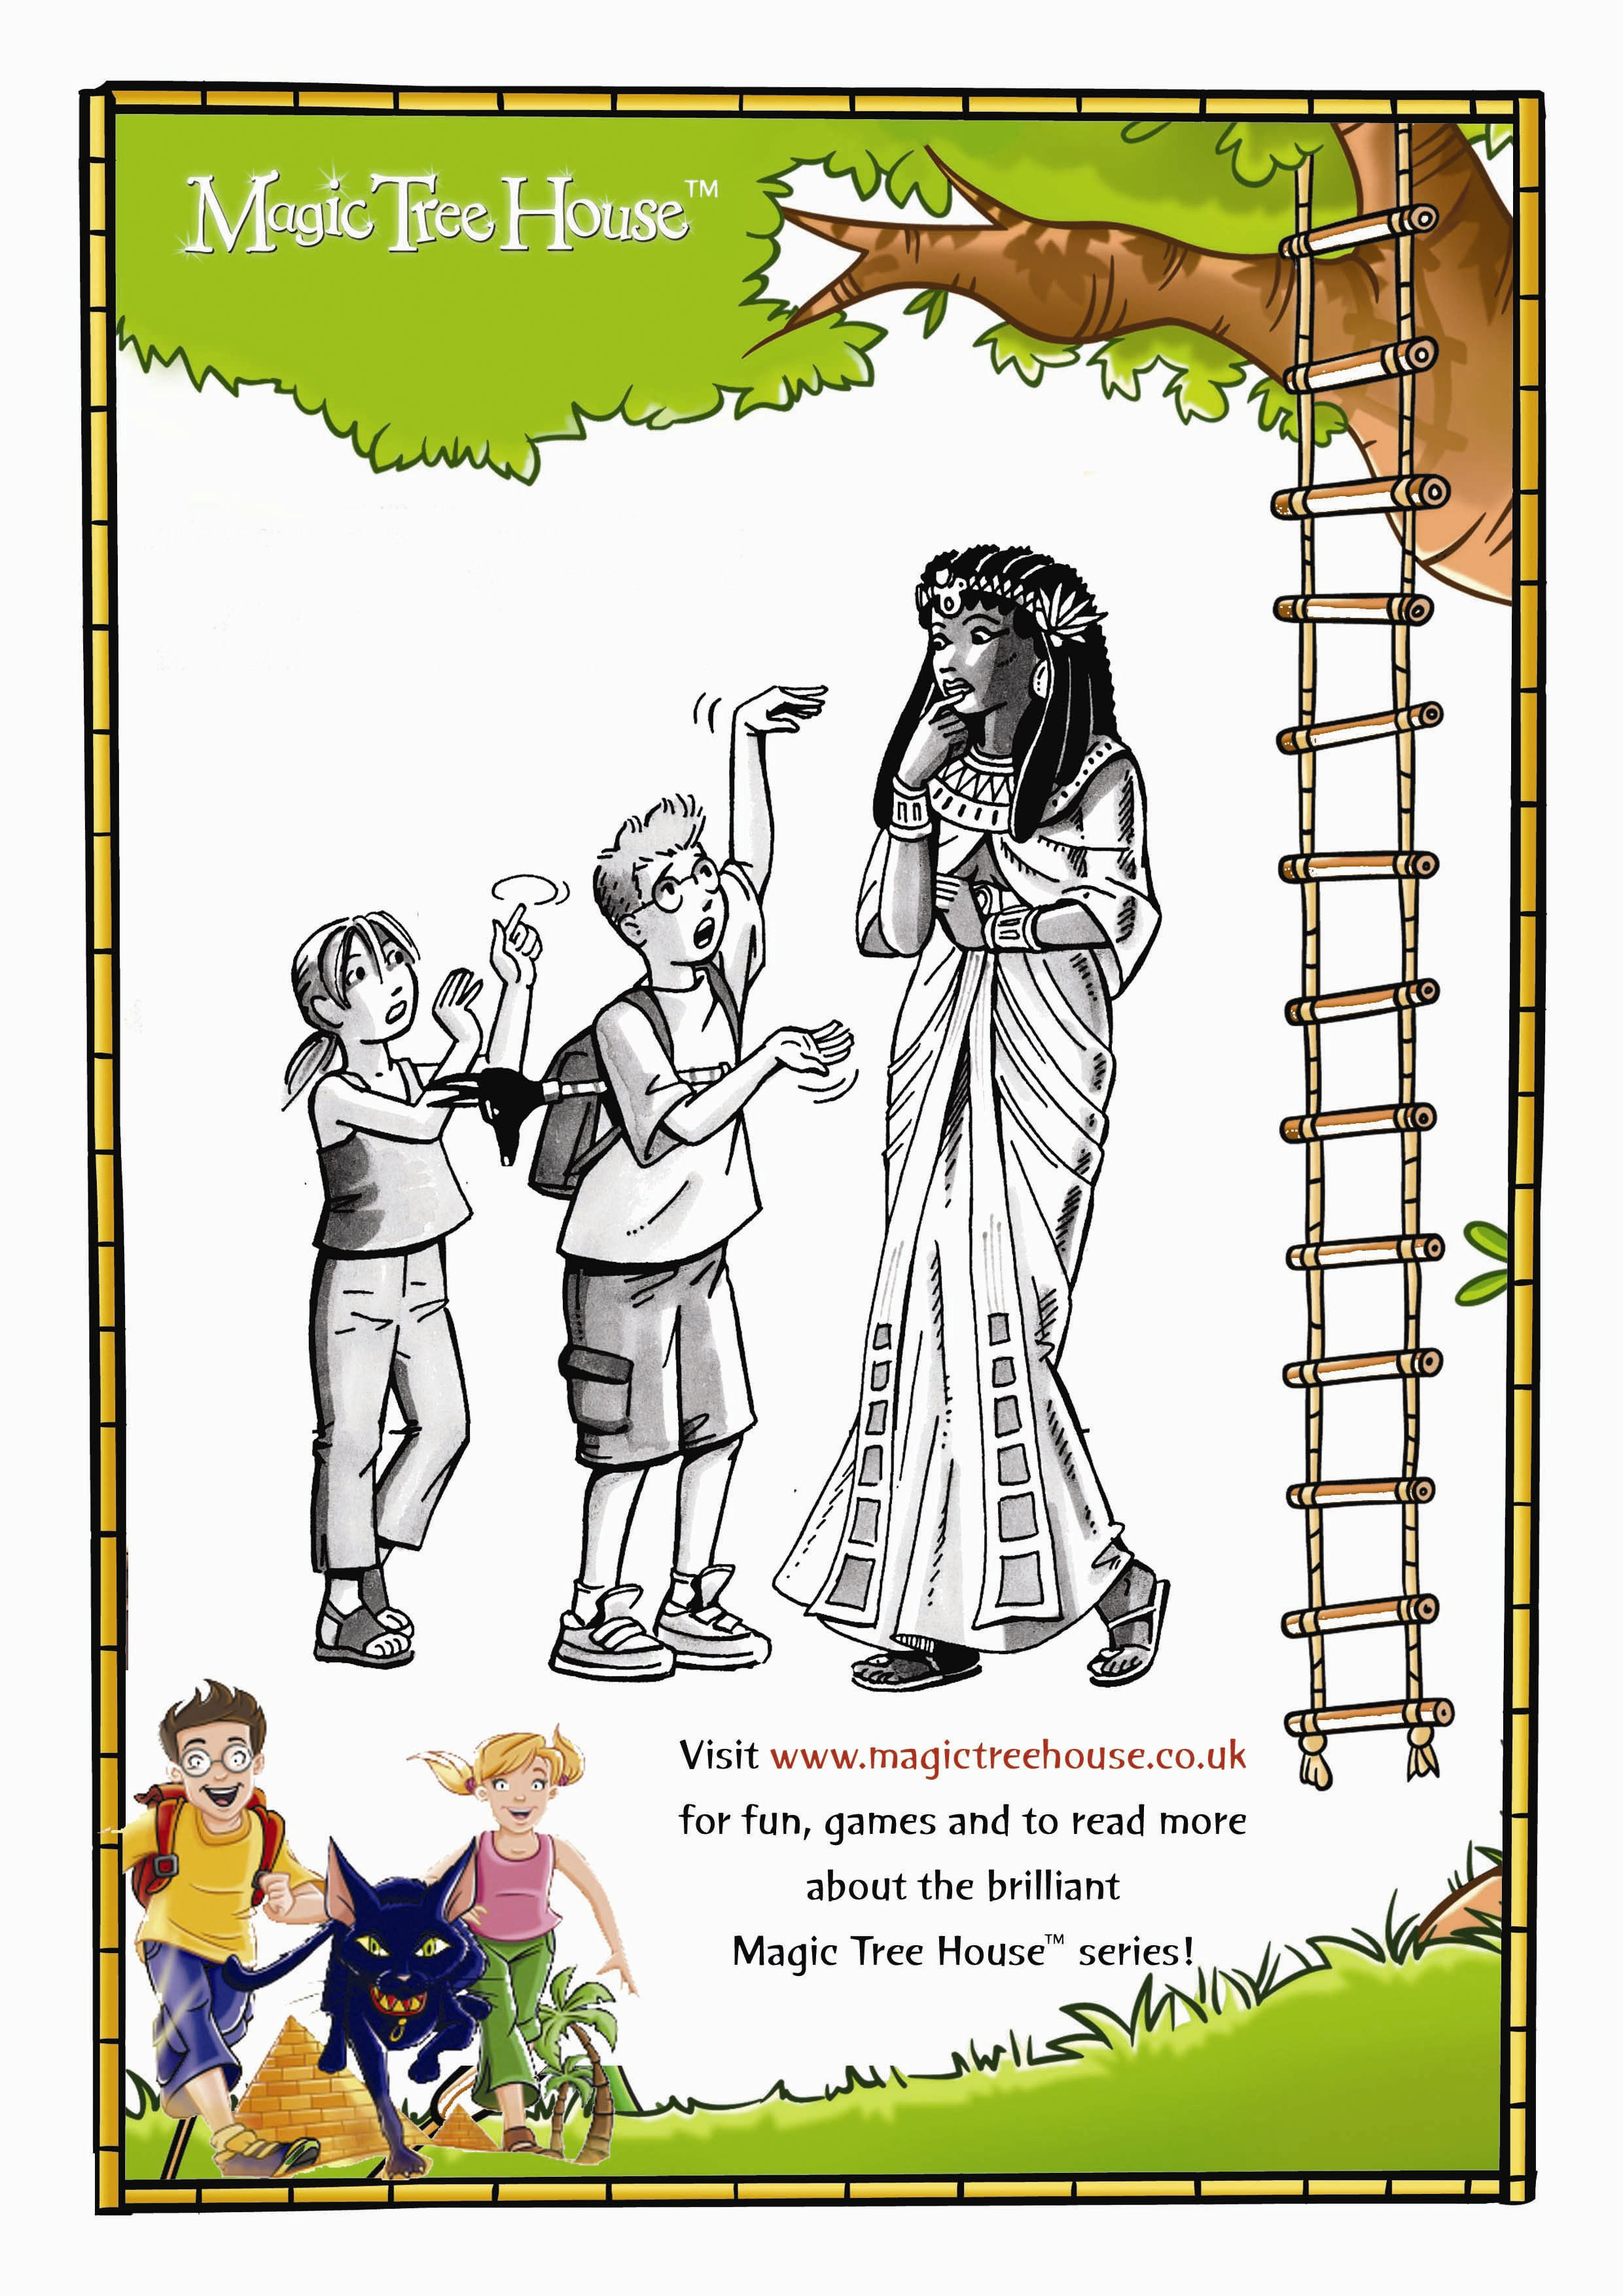 Magic Tree House Coloring Pages
 Magic Tree House Colouring Activity Scholastic Kids Club